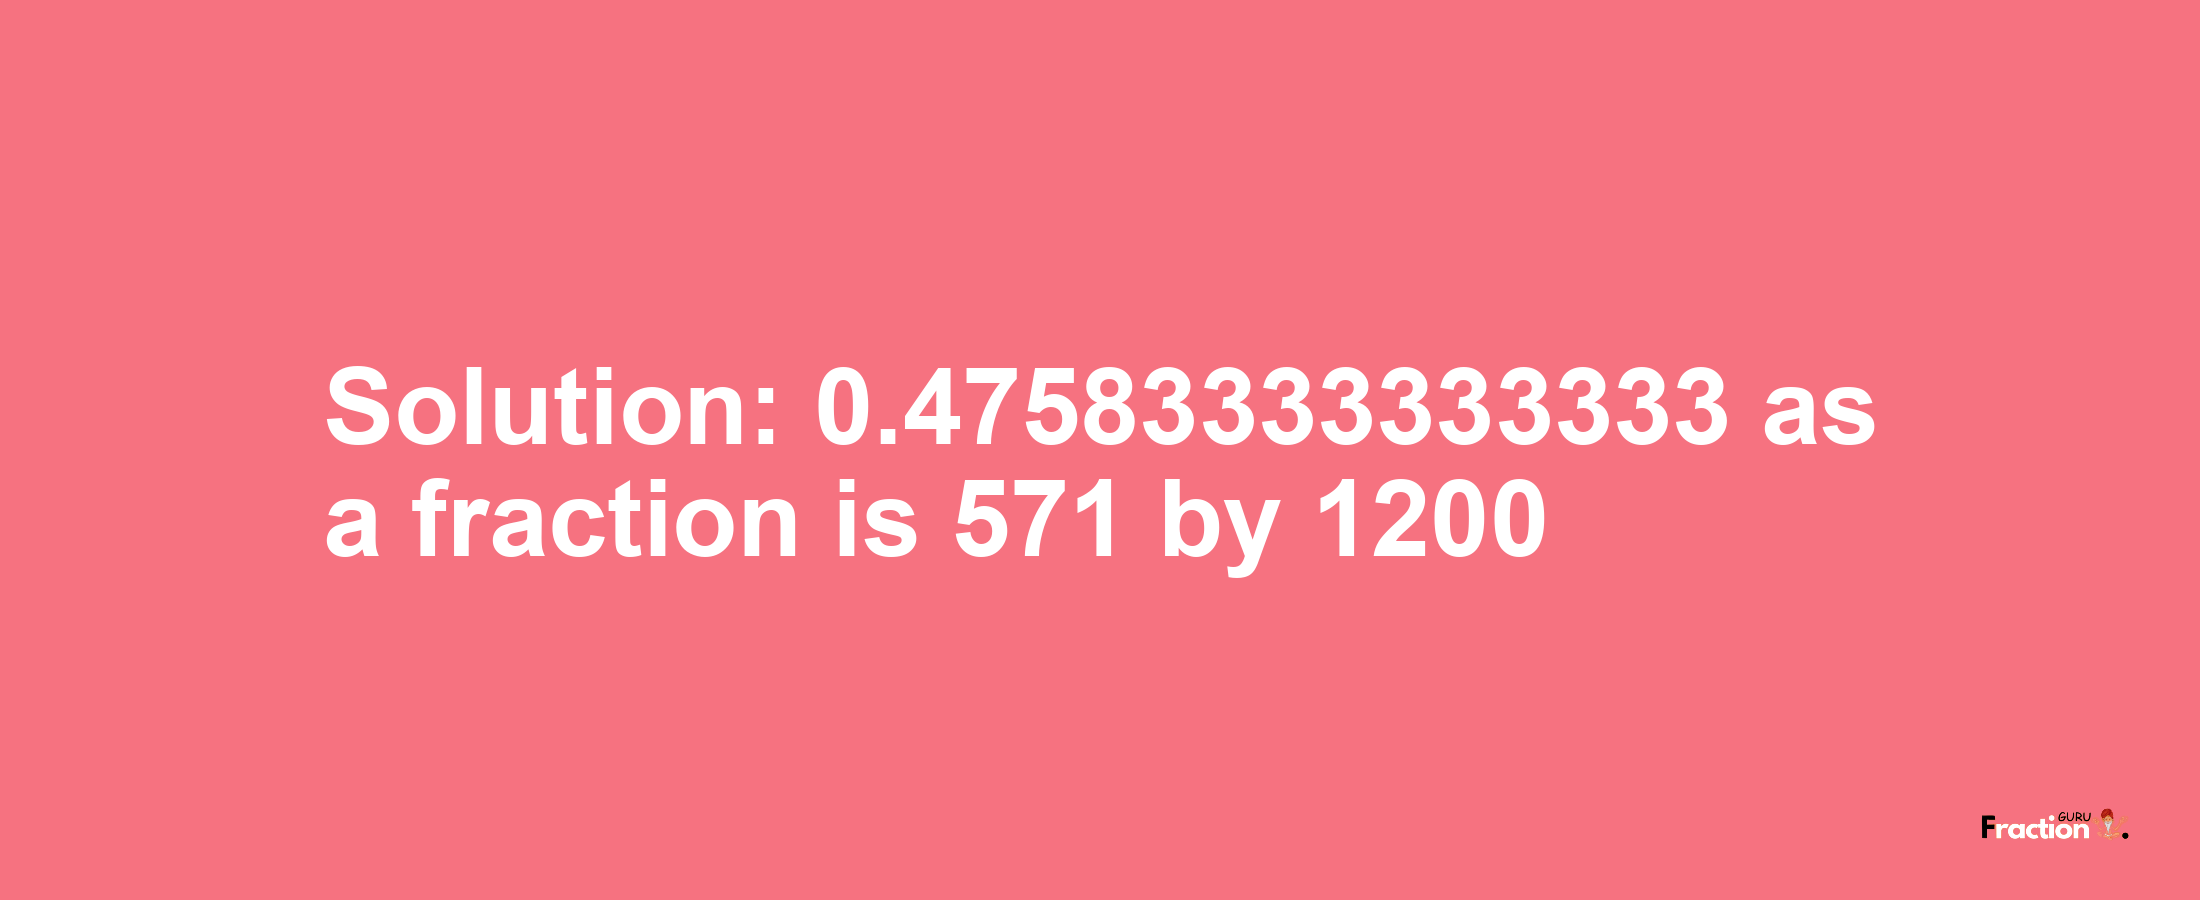 Solution:0.47583333333333 as a fraction is 571/1200